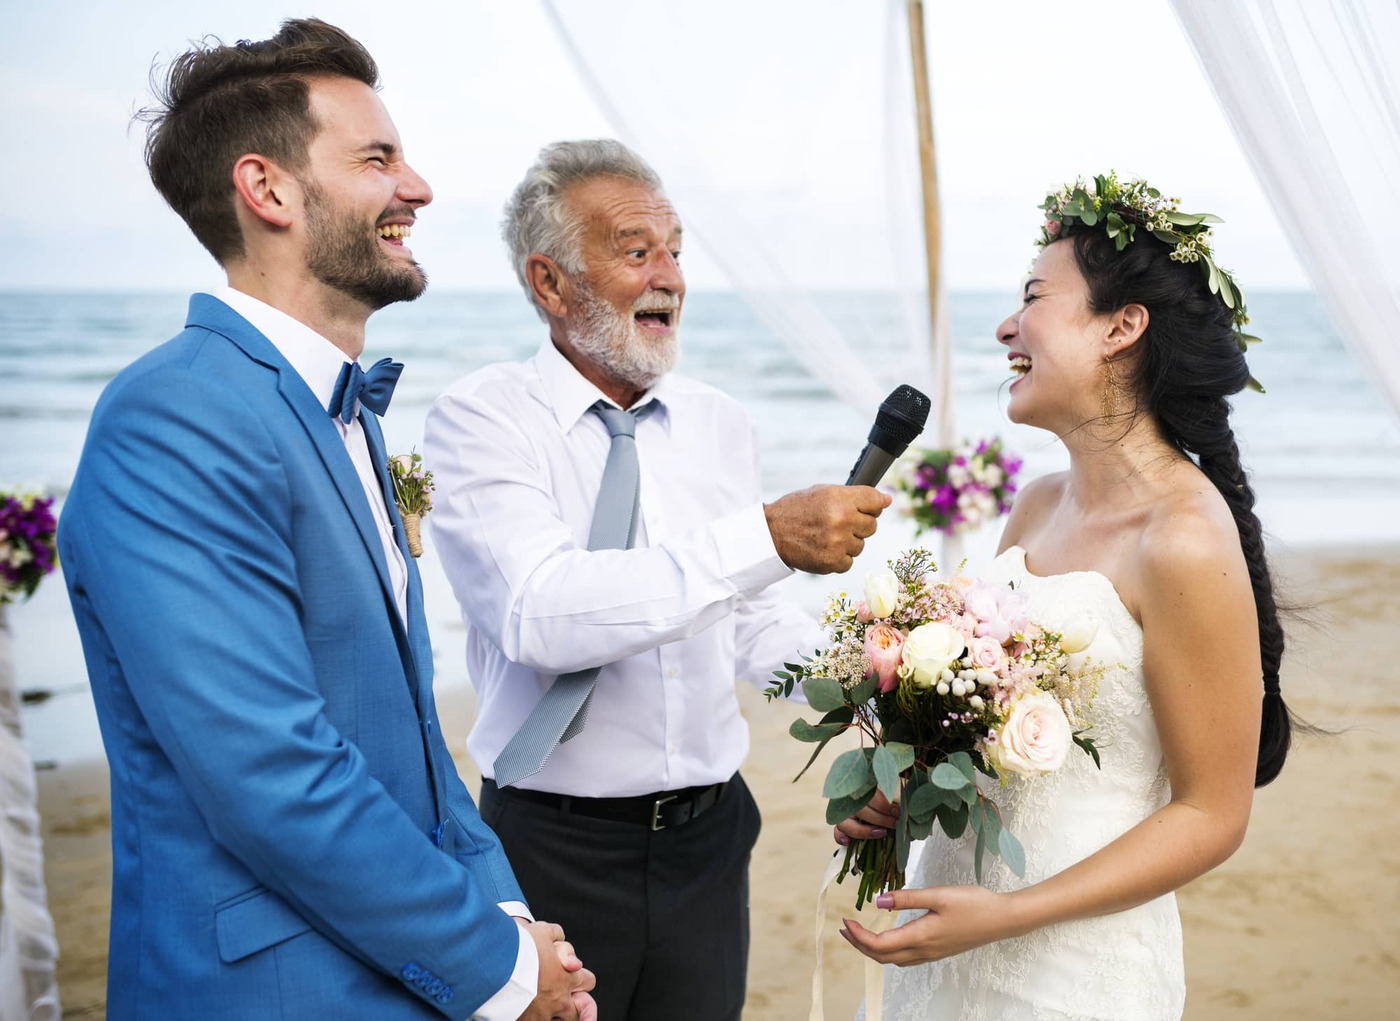 Wedding Pioneer is a platform that helps couples connect with photographers, vendors and wedding planners.